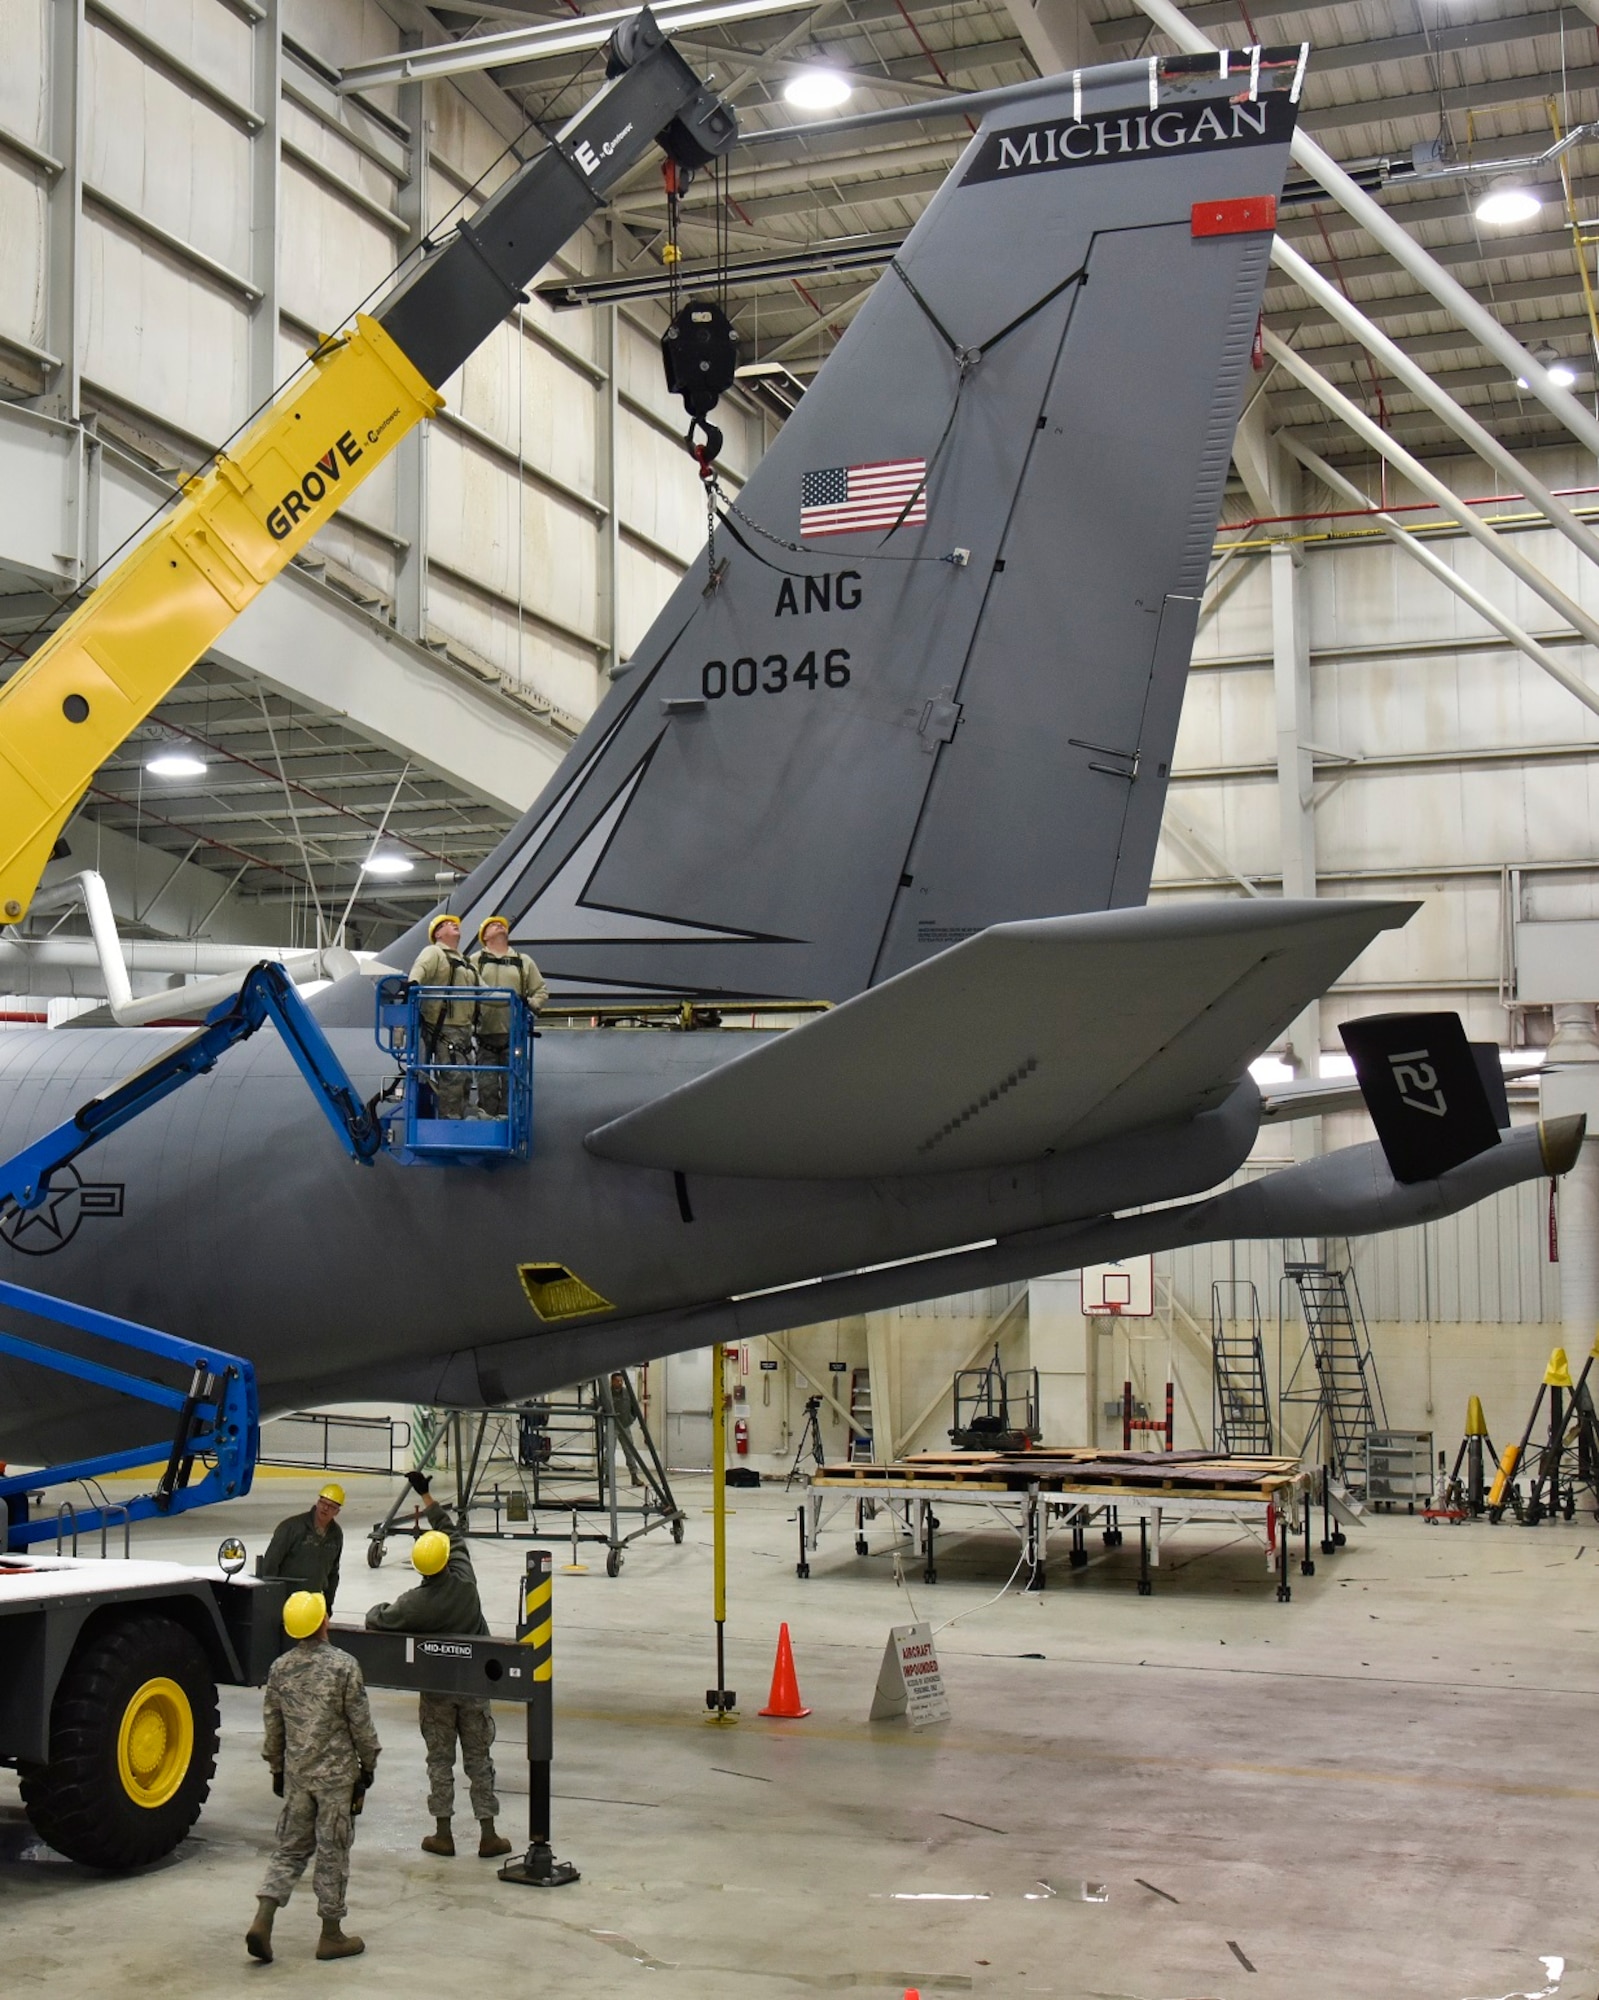 Airmen with the 191st Maintenance Group work to repair the vertical stabilizer of a KC-135 Stratotanker at Selfridge Air National Guard Base, Mich. The aircraft had been struck by lightning shortly before landing at the base in late 2015. The aircraft landed without incident, but required extensive repairs. It has since been returned to service. (U.S. Air National Guard photo by Terry Atwell)